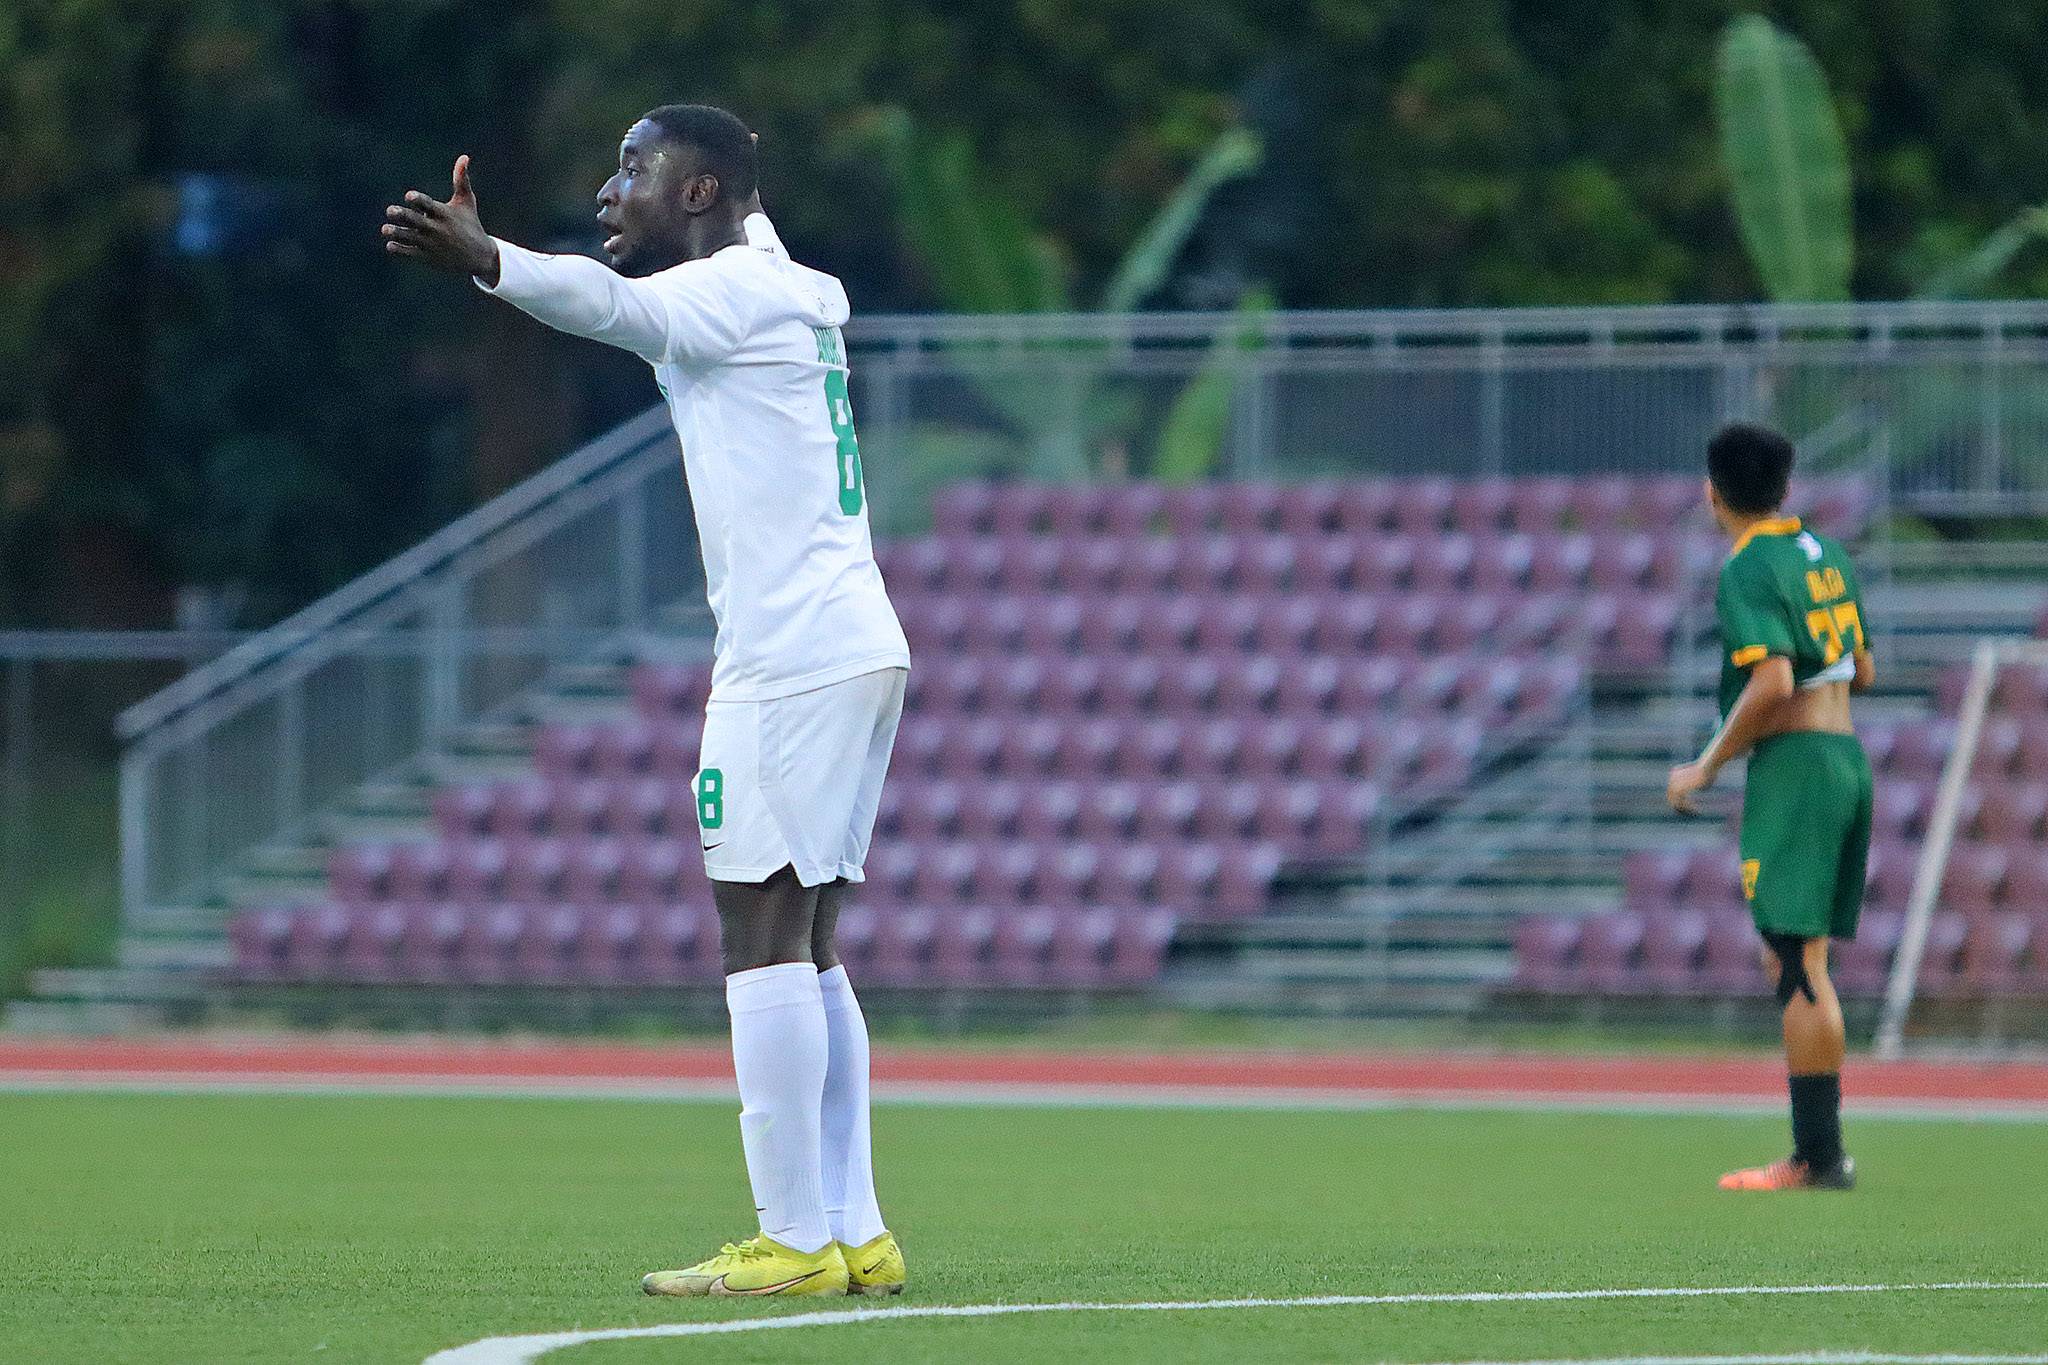 UAAP-85-MFB-Engatte-Anoh-DLSU-1 Isaac Anoh's perseverance pays off with breakthrough goal for La Salle DLSU Football News UAAP  - philippine sports news